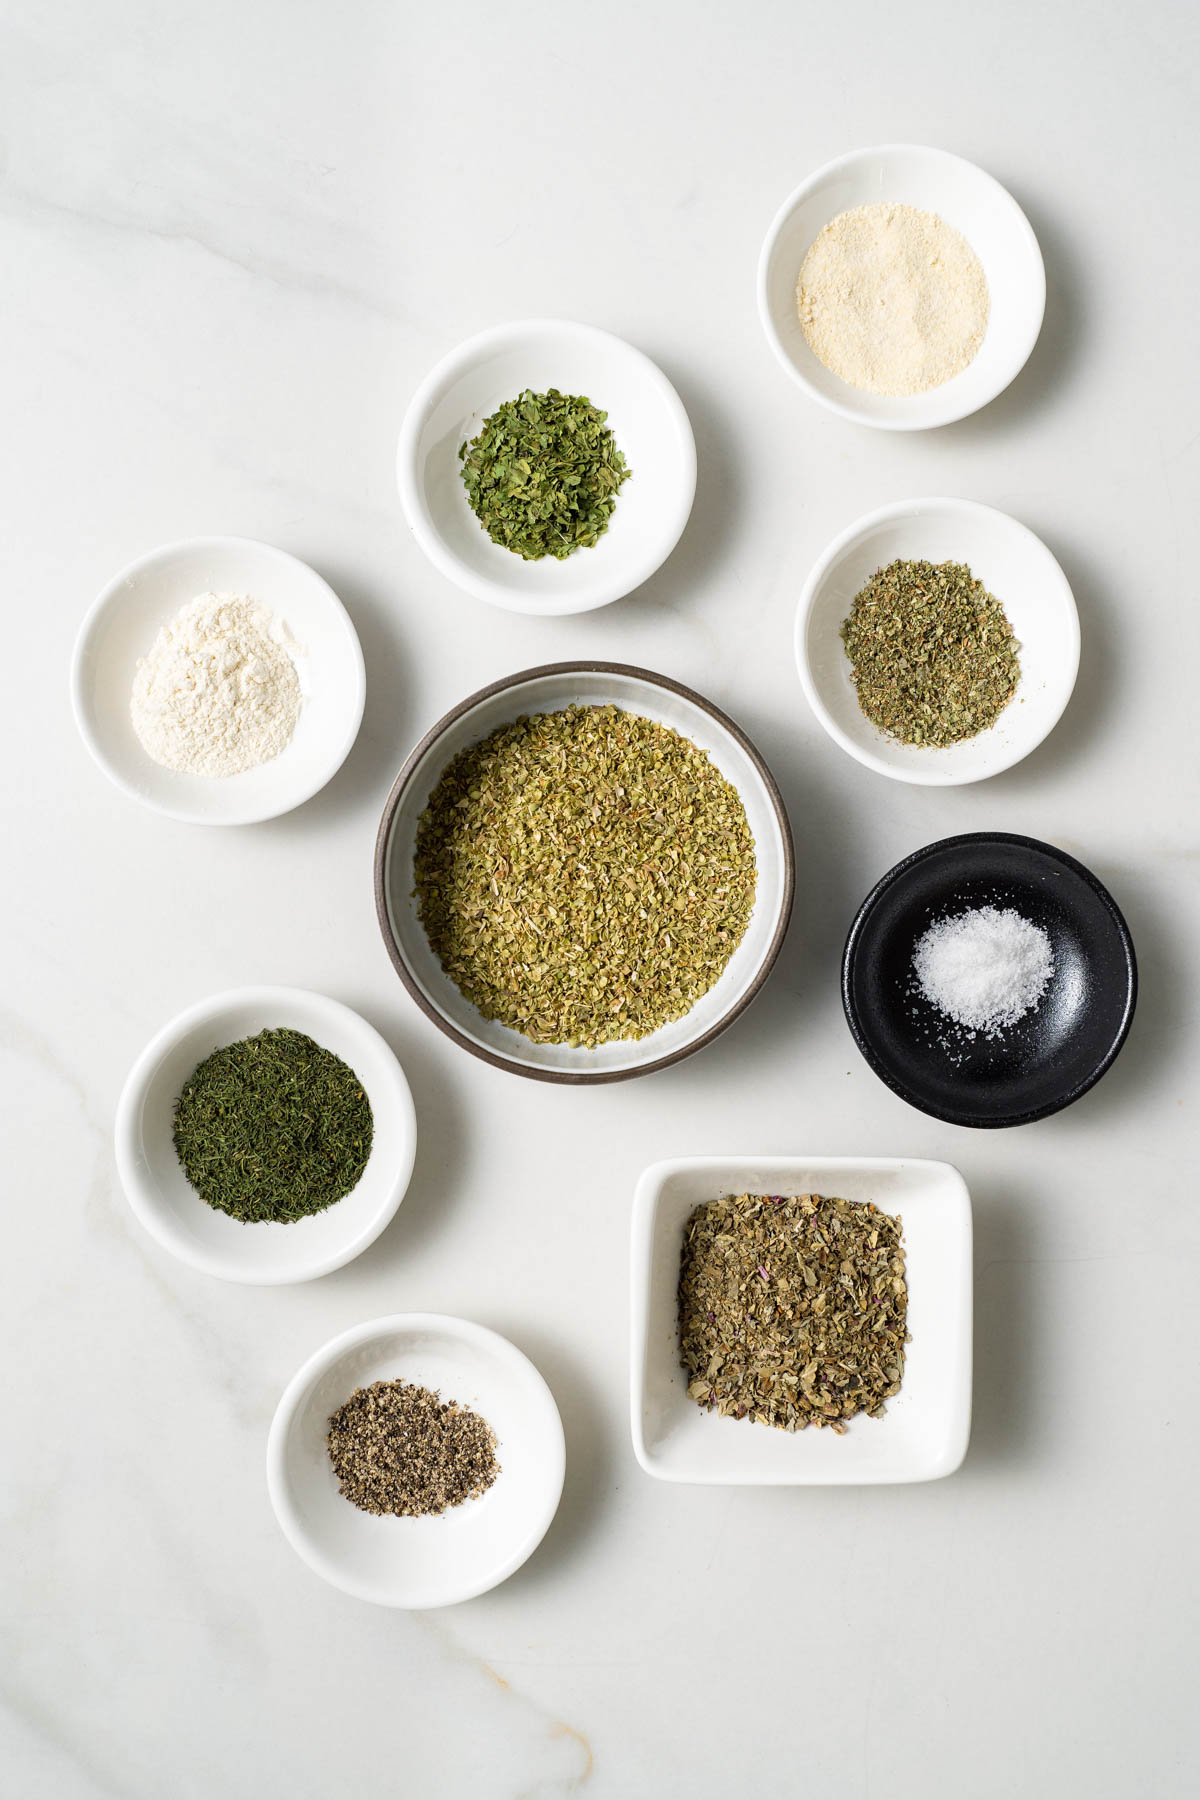 Individual bowls containing herbs and spices are displayed on a white surface. 